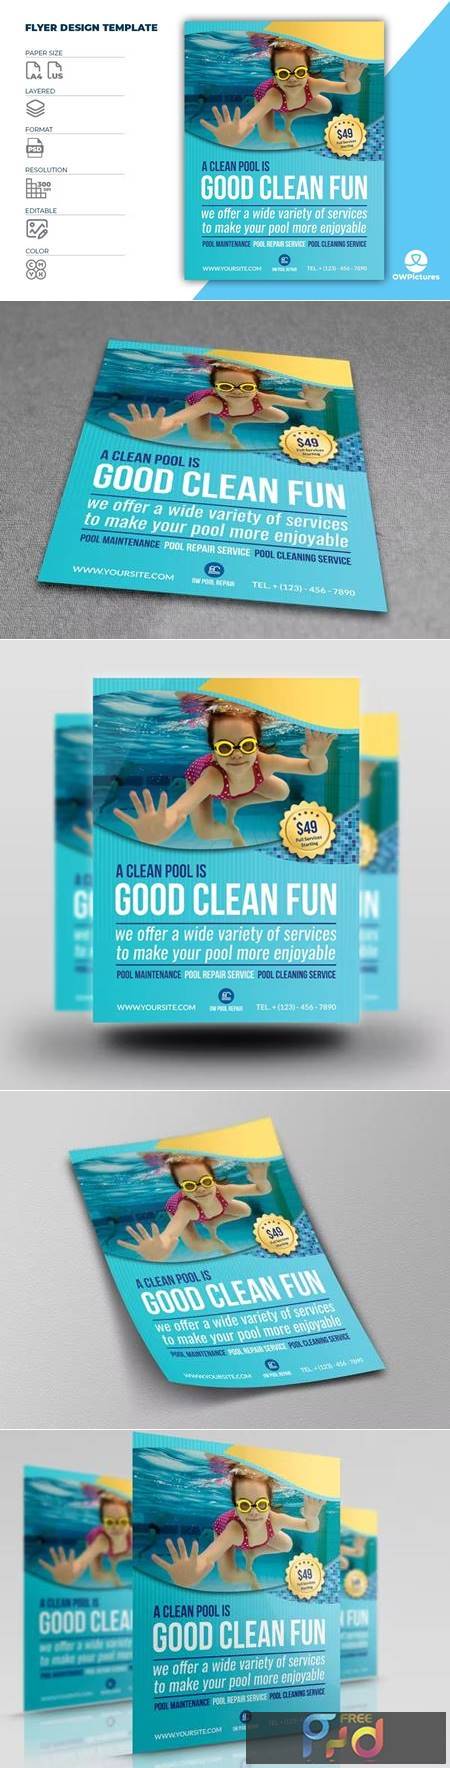 Swimming Pool Cleaning Service Flyer Template V59EV2U 1